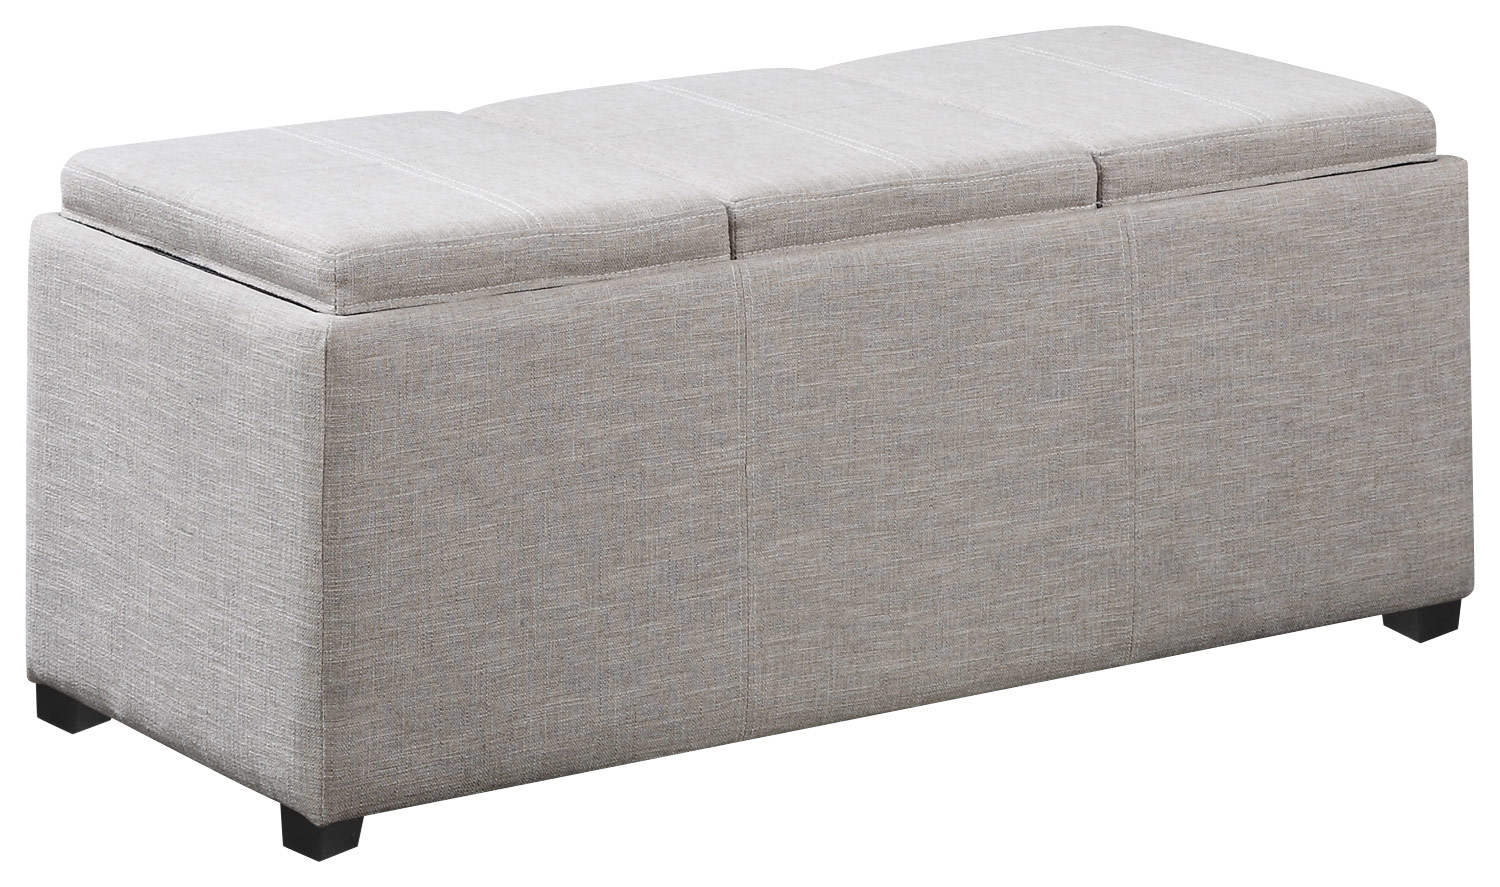 Simpli Home - Avalon Rectangular Ottoman With Inner Storage - Natural was $240.99 now $170.99 (29.0% off)